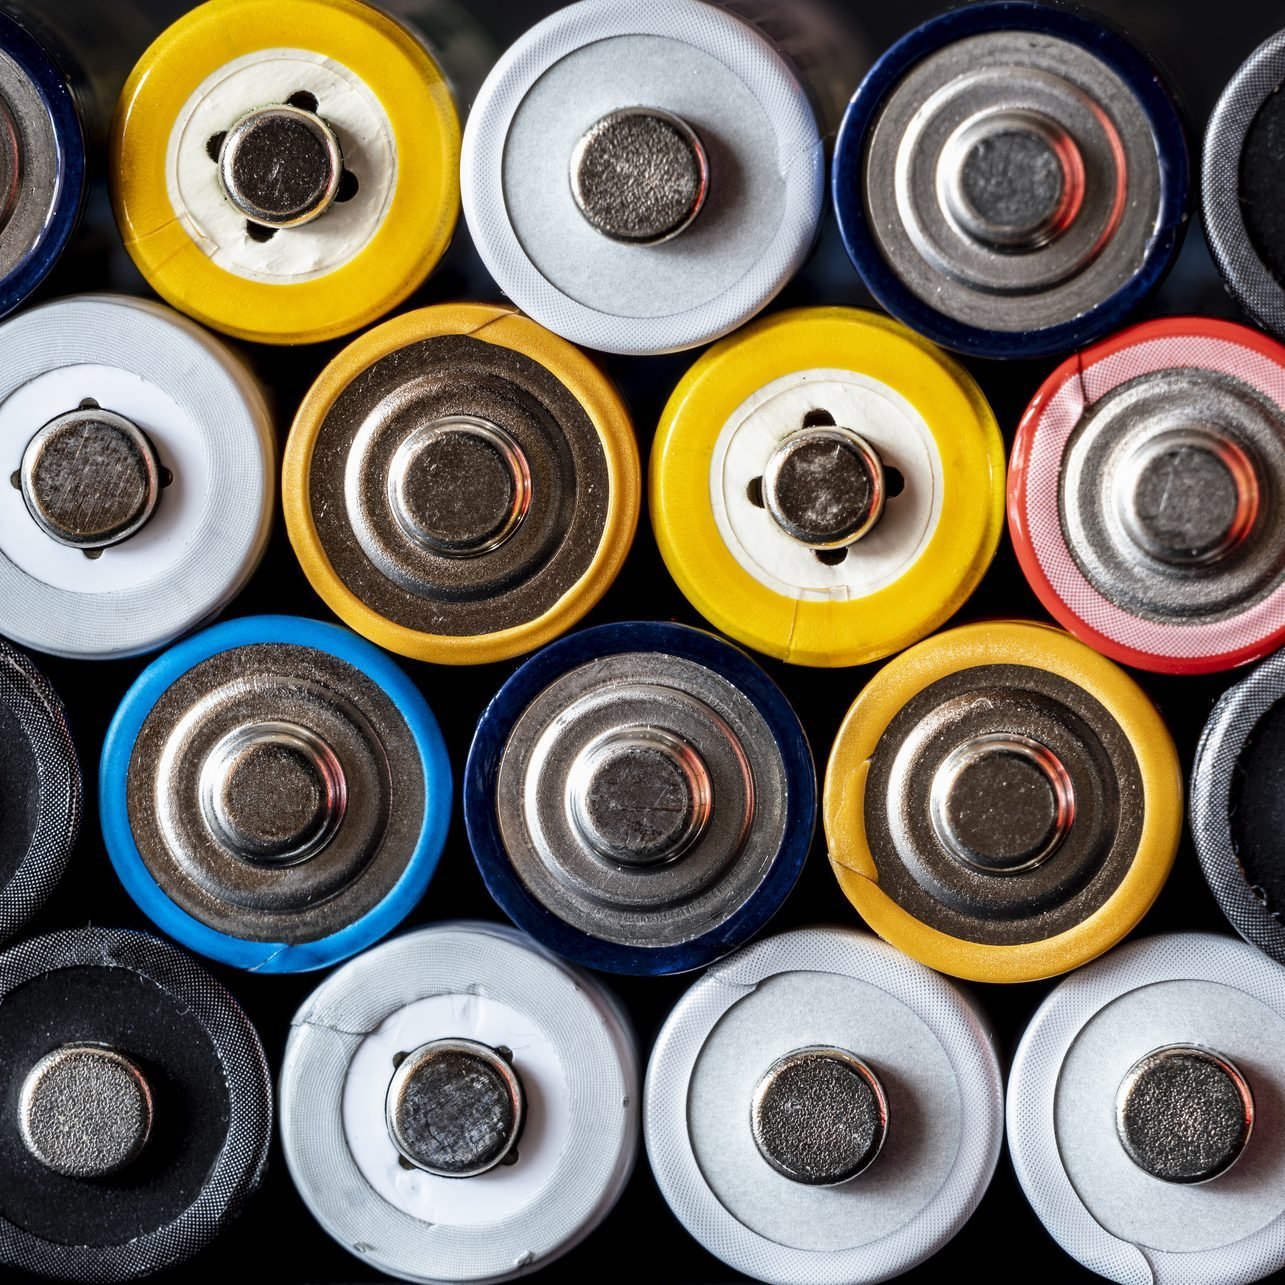 How to Use AAA Batteries in Place of AA